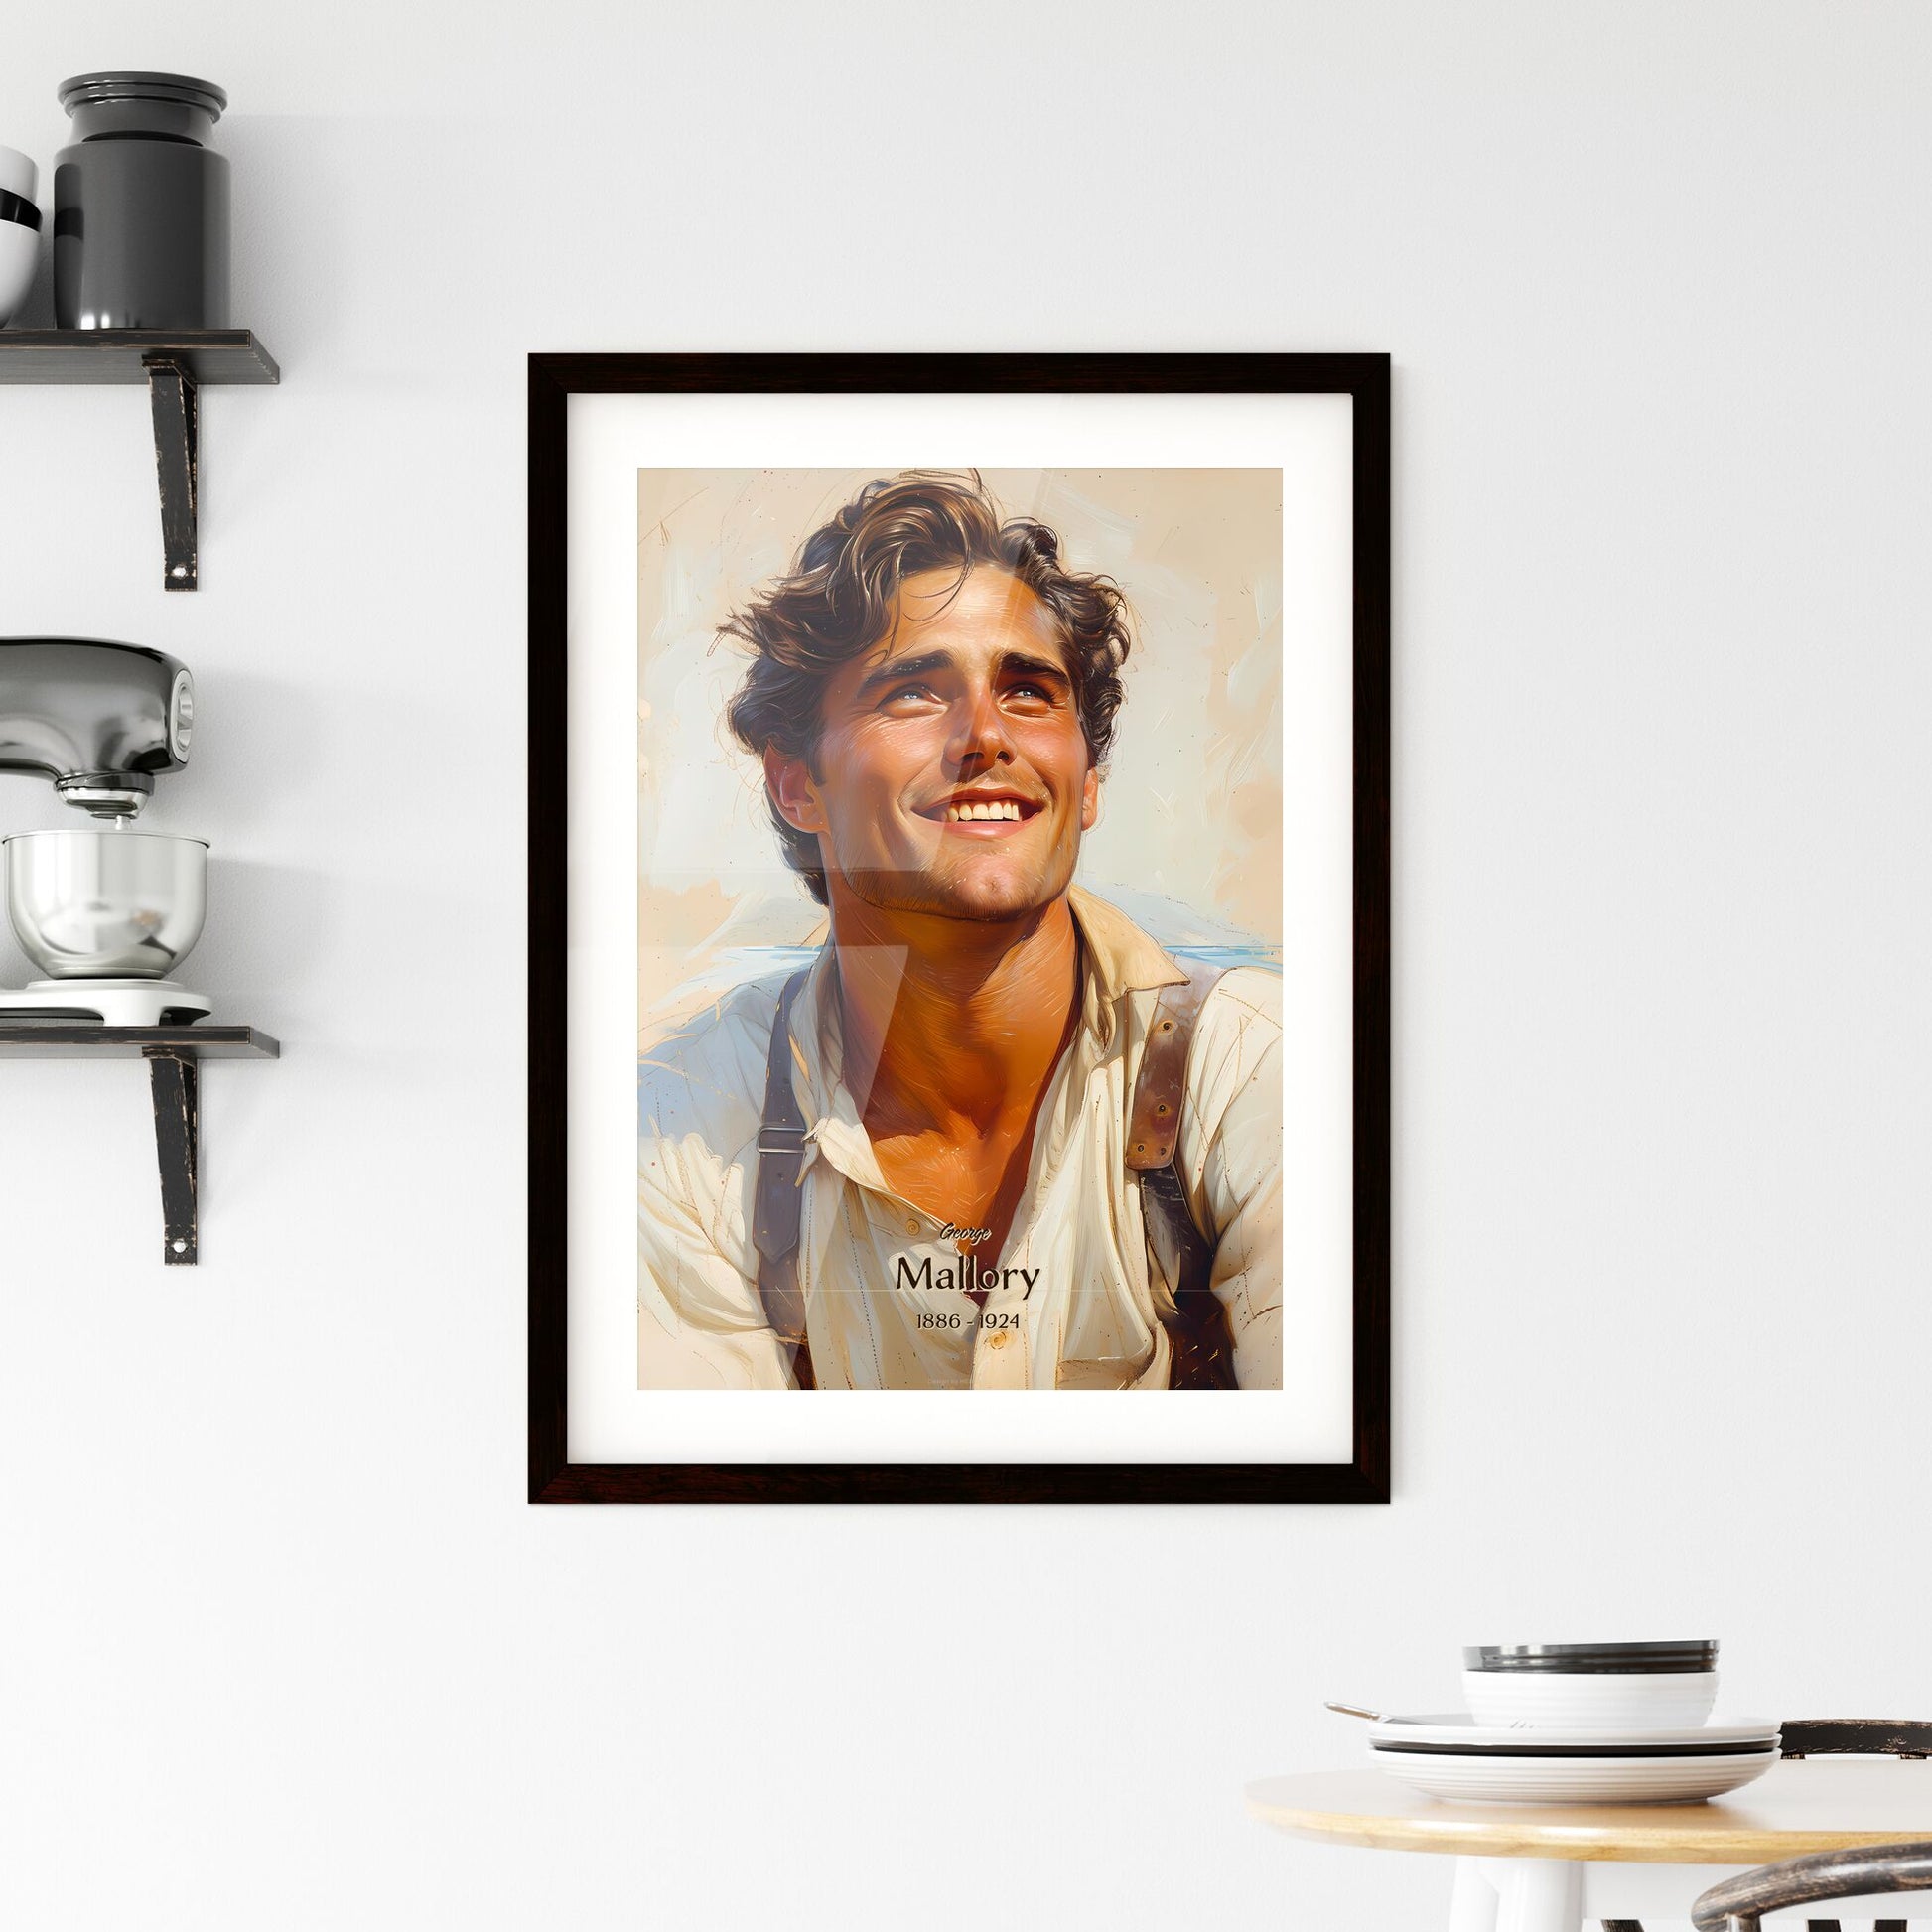 George, Mallory, 1886 - 1924, A Poster of a man smiling with brown hair Default Title